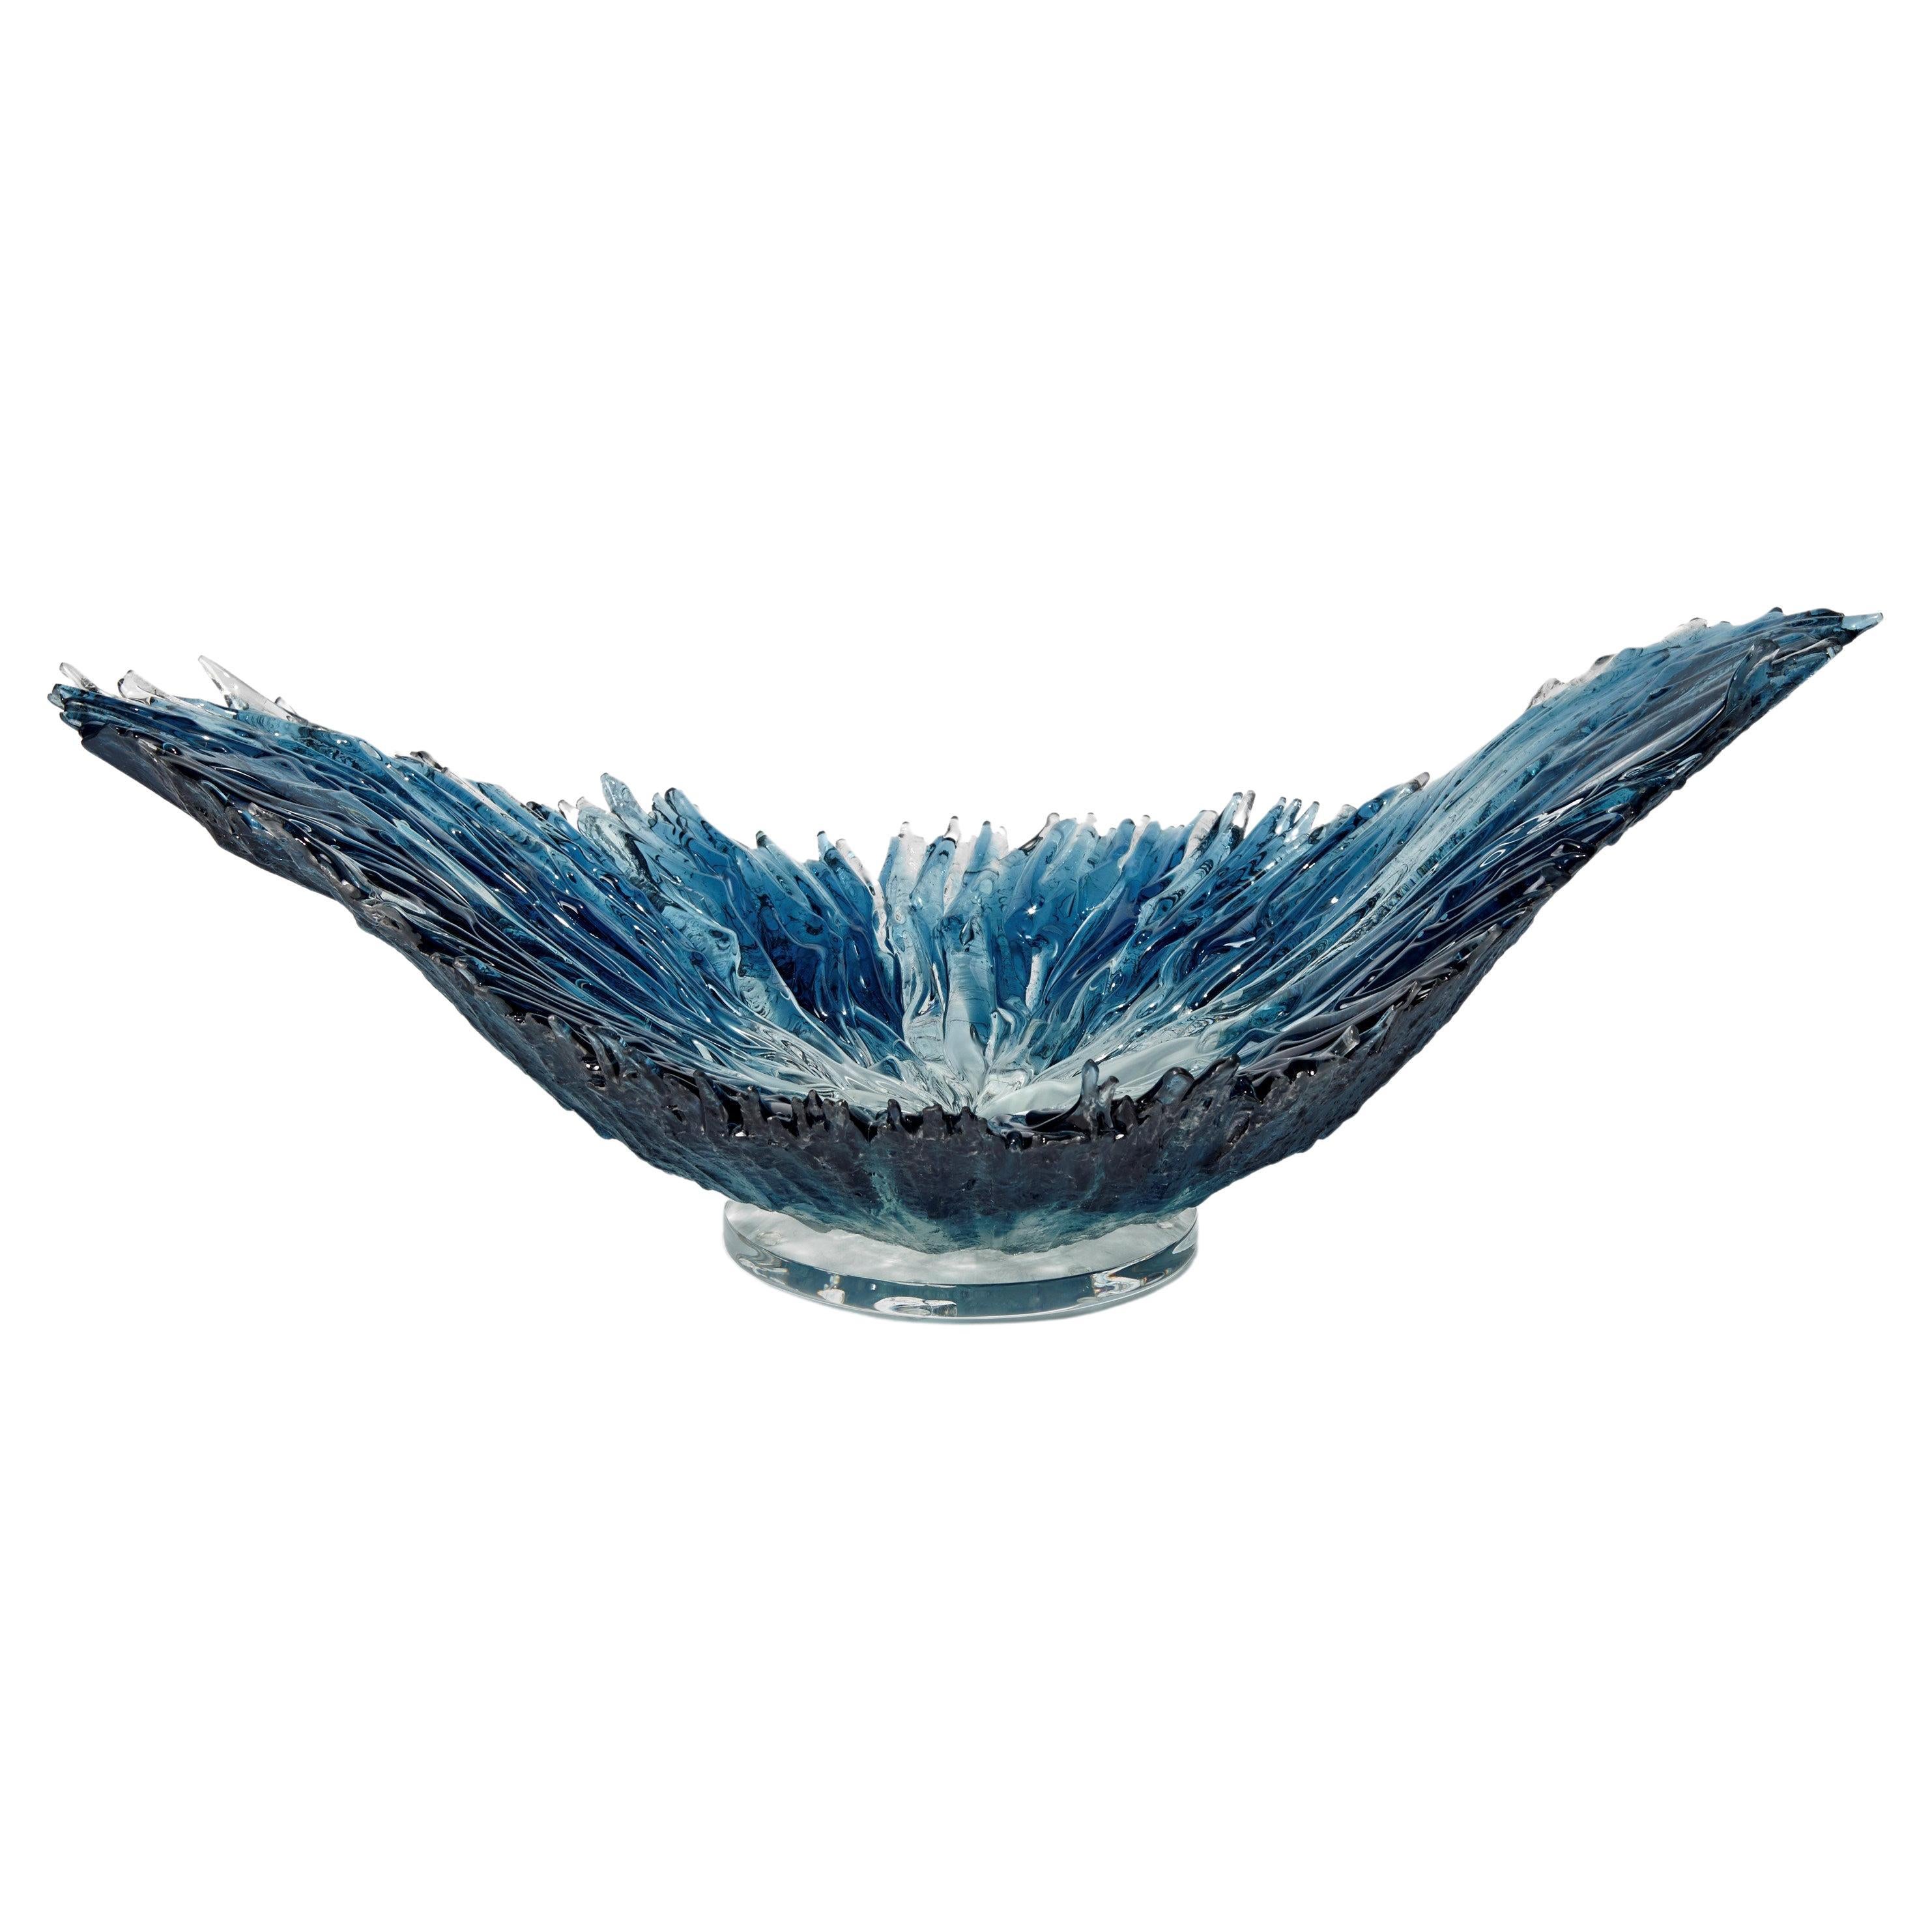 Oval Coral Bowl in Aqua, Turquoise & Clear Glass Centrepiece by Wayne Charmer